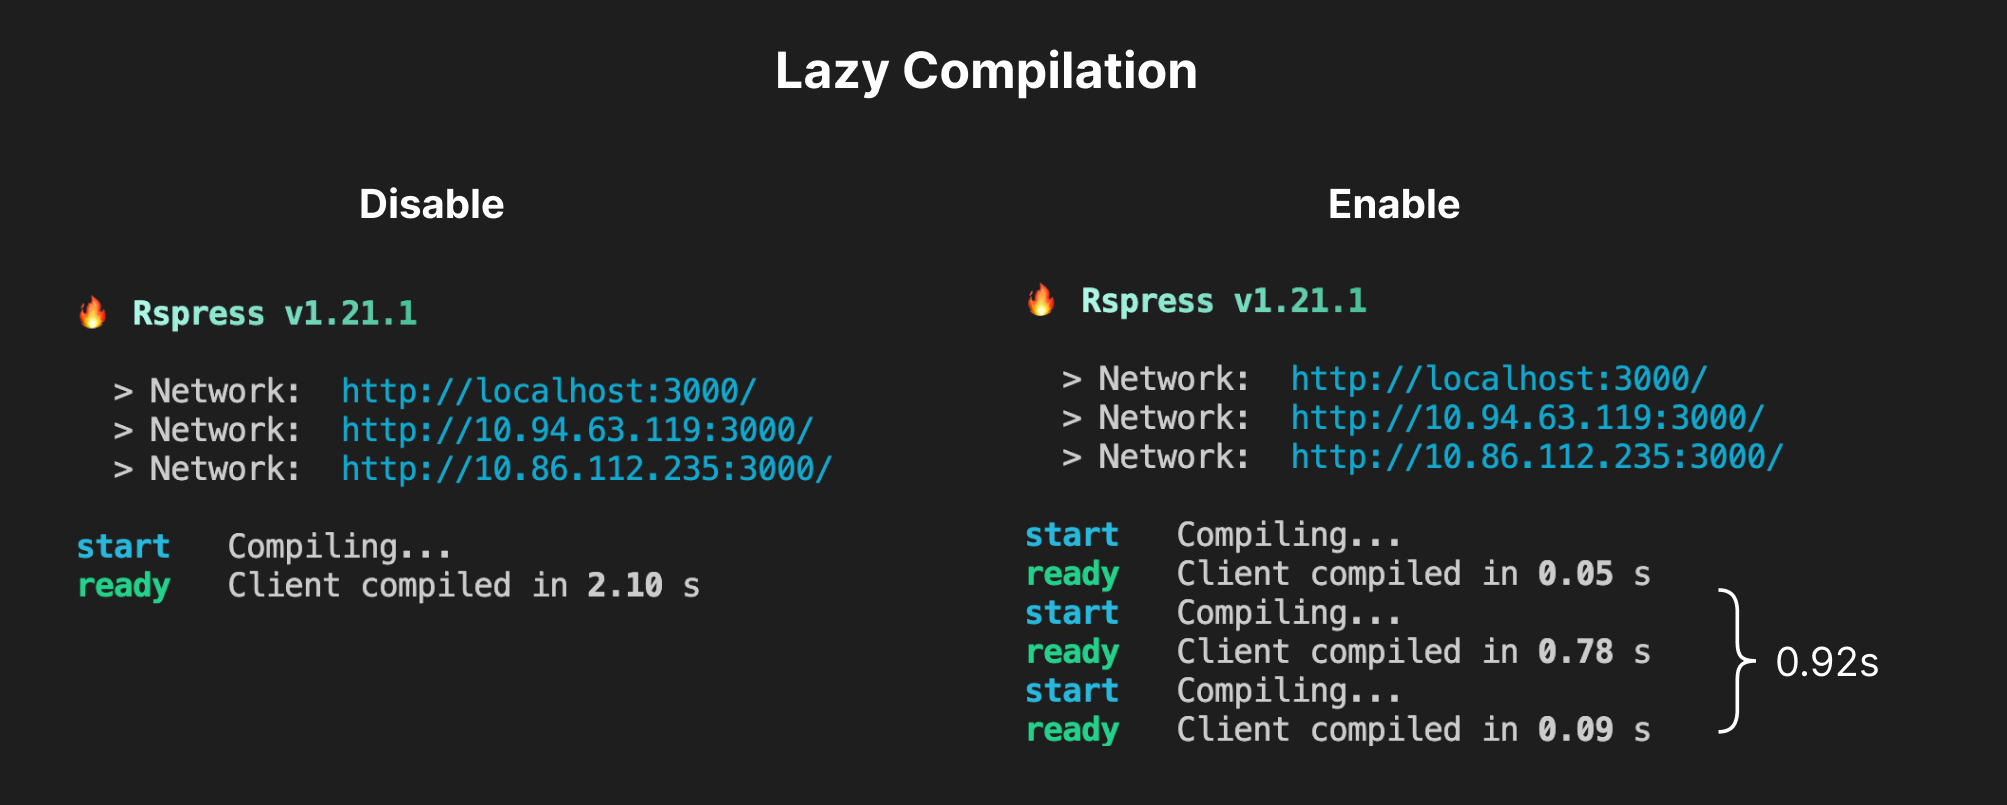 lazy-compilation-compare